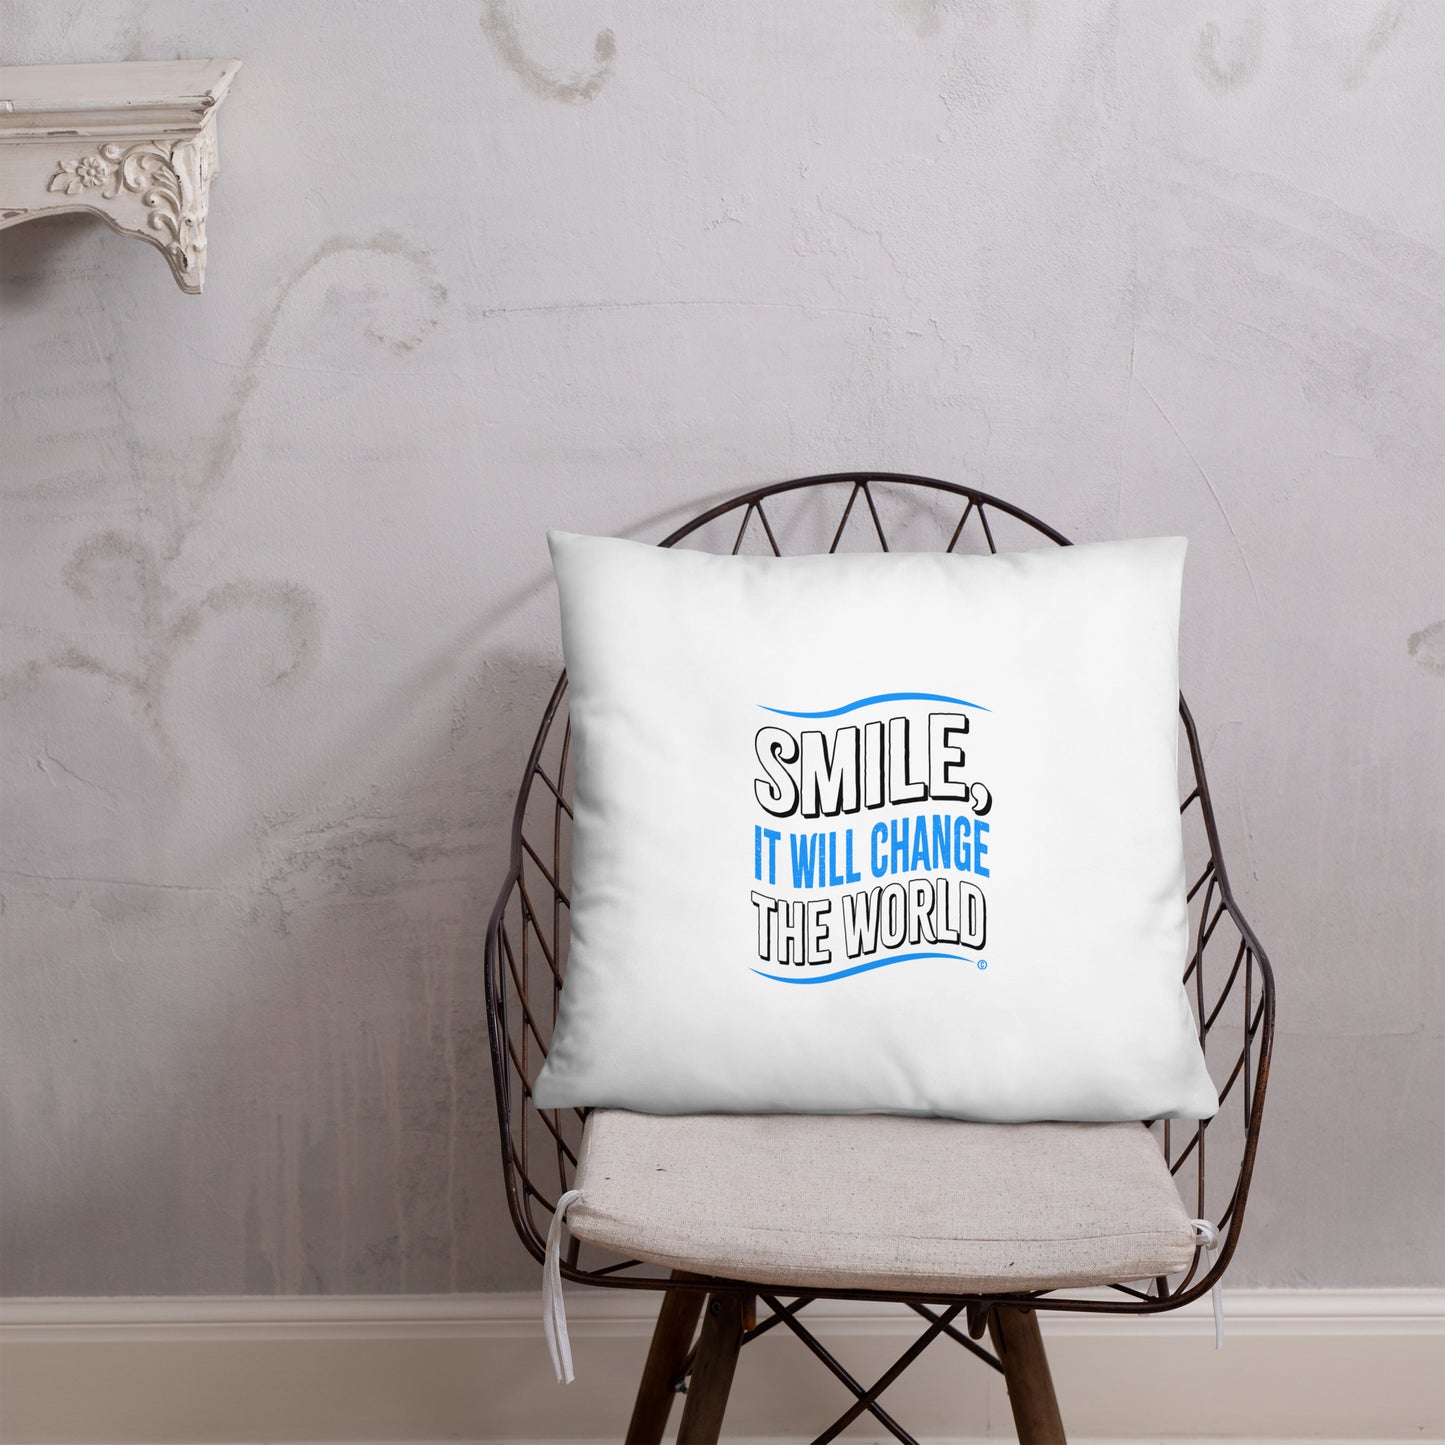 Smile, It will Change the World Basic Pillows